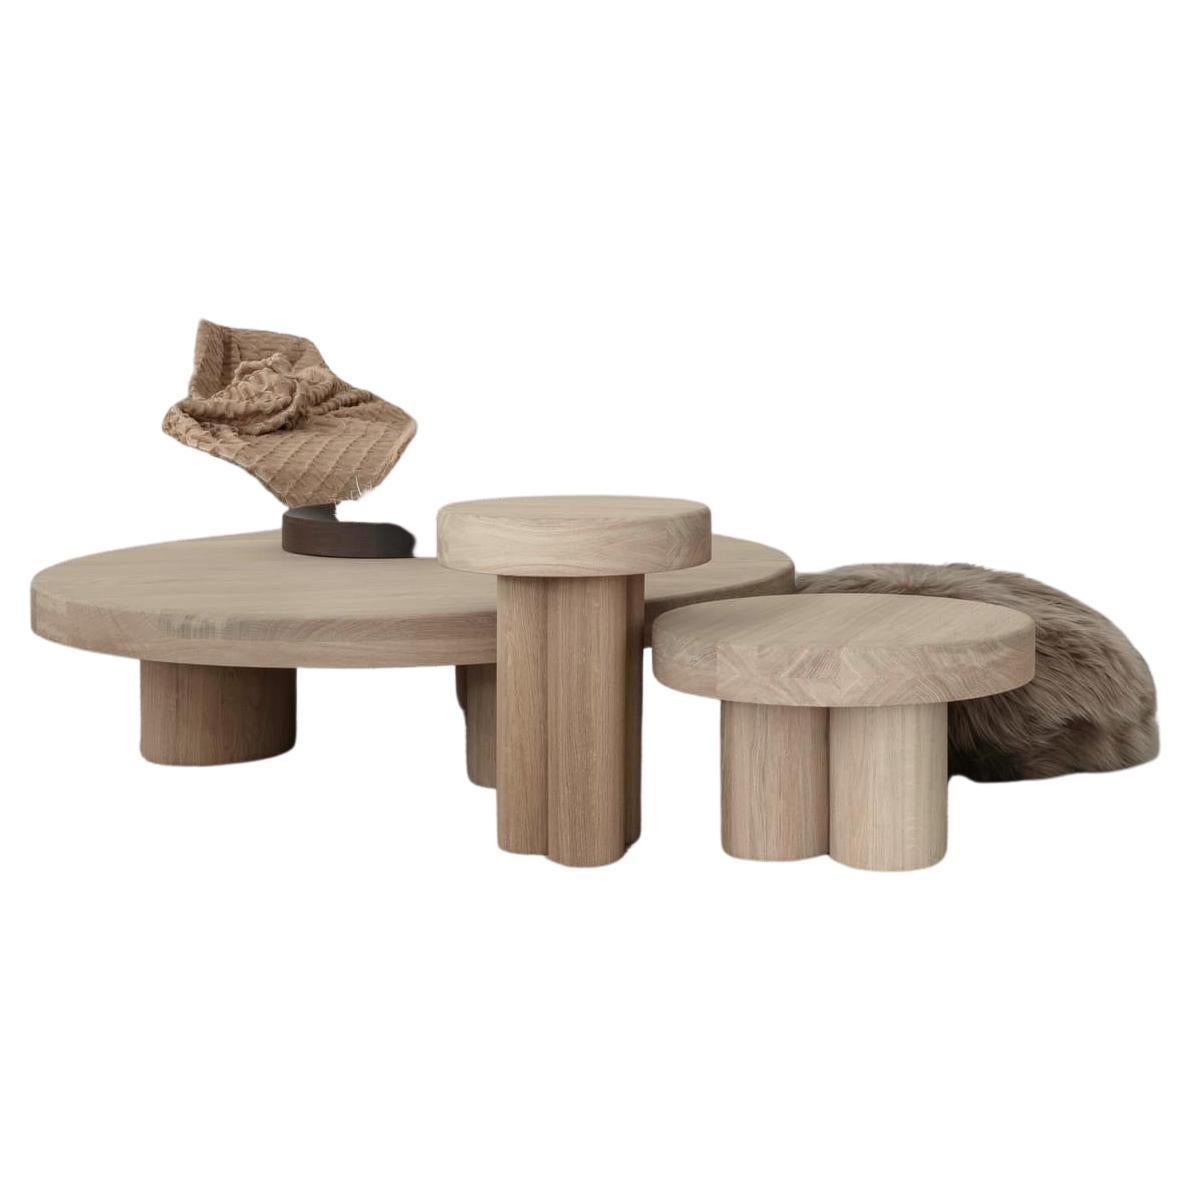 Kluskens Thick-Wood Coffee Tables